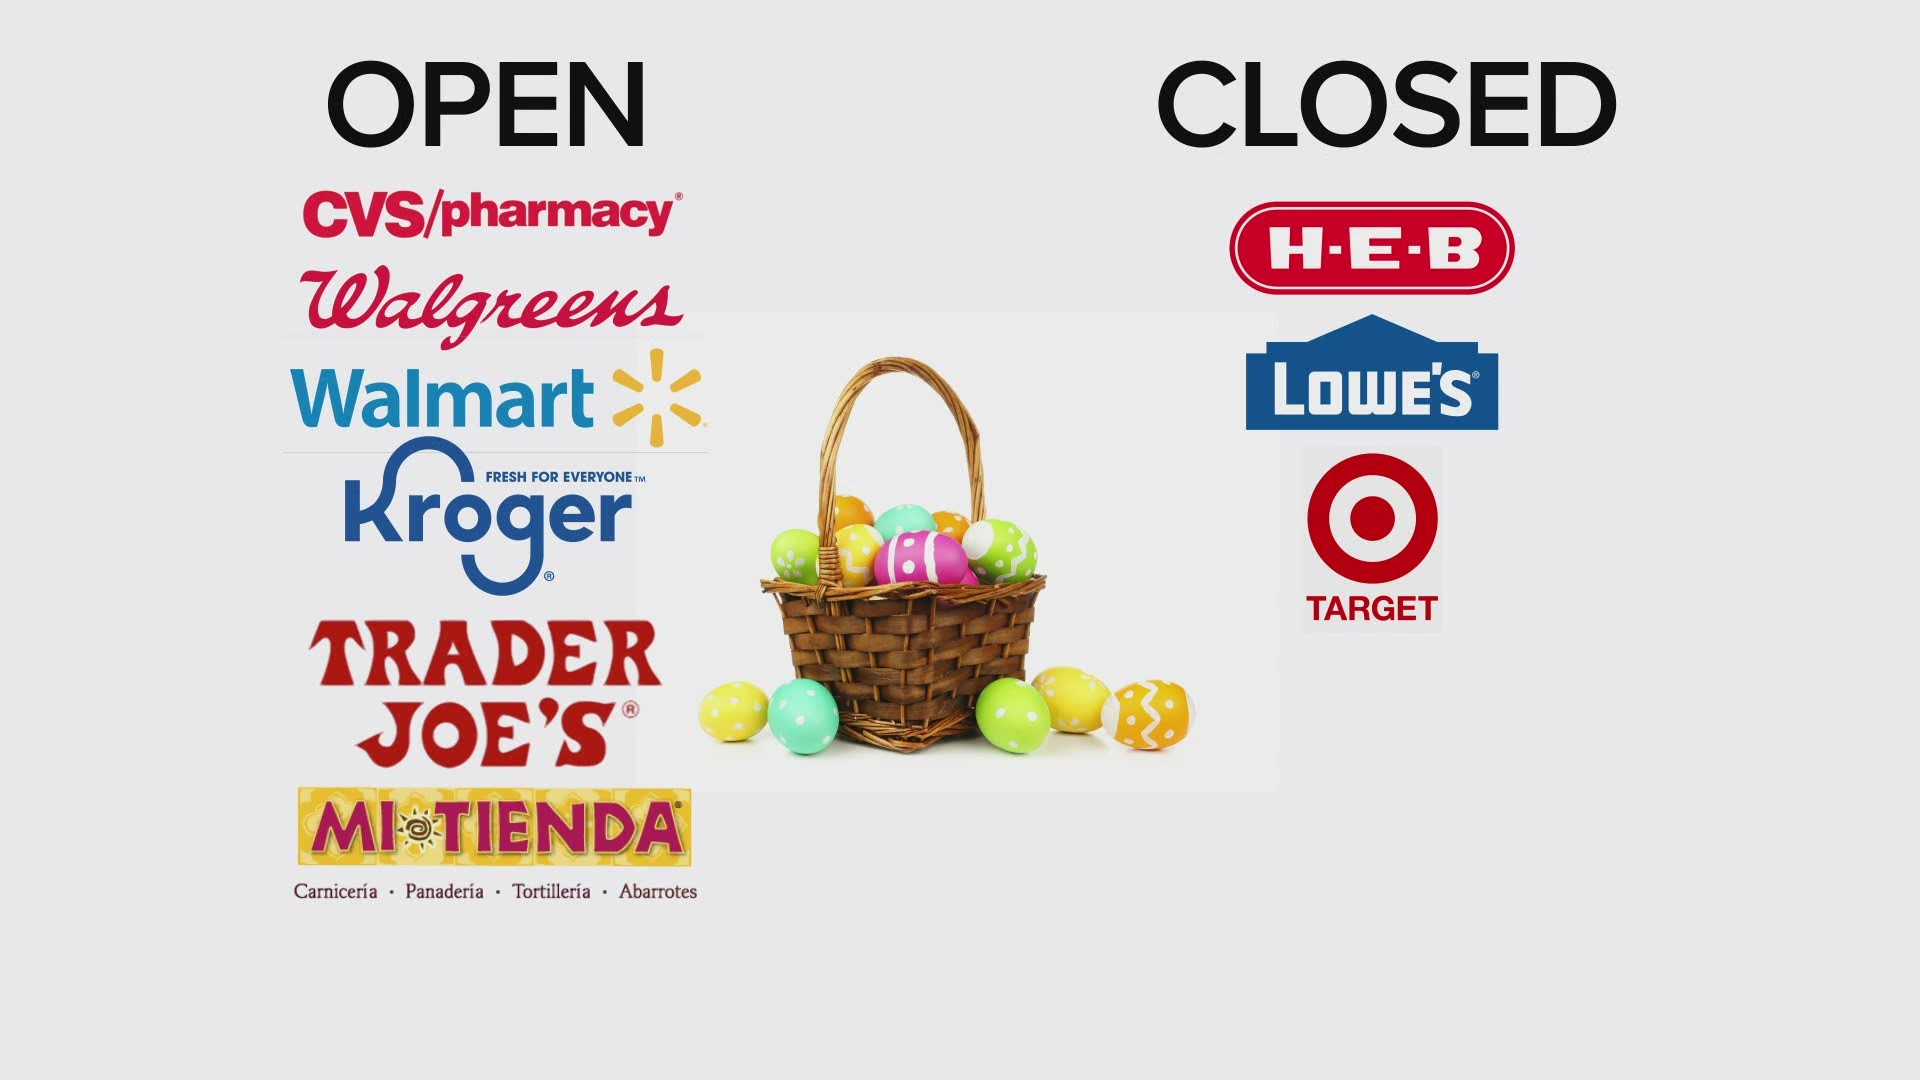 Easter Sunday 2021: What stores are open and which are closed?